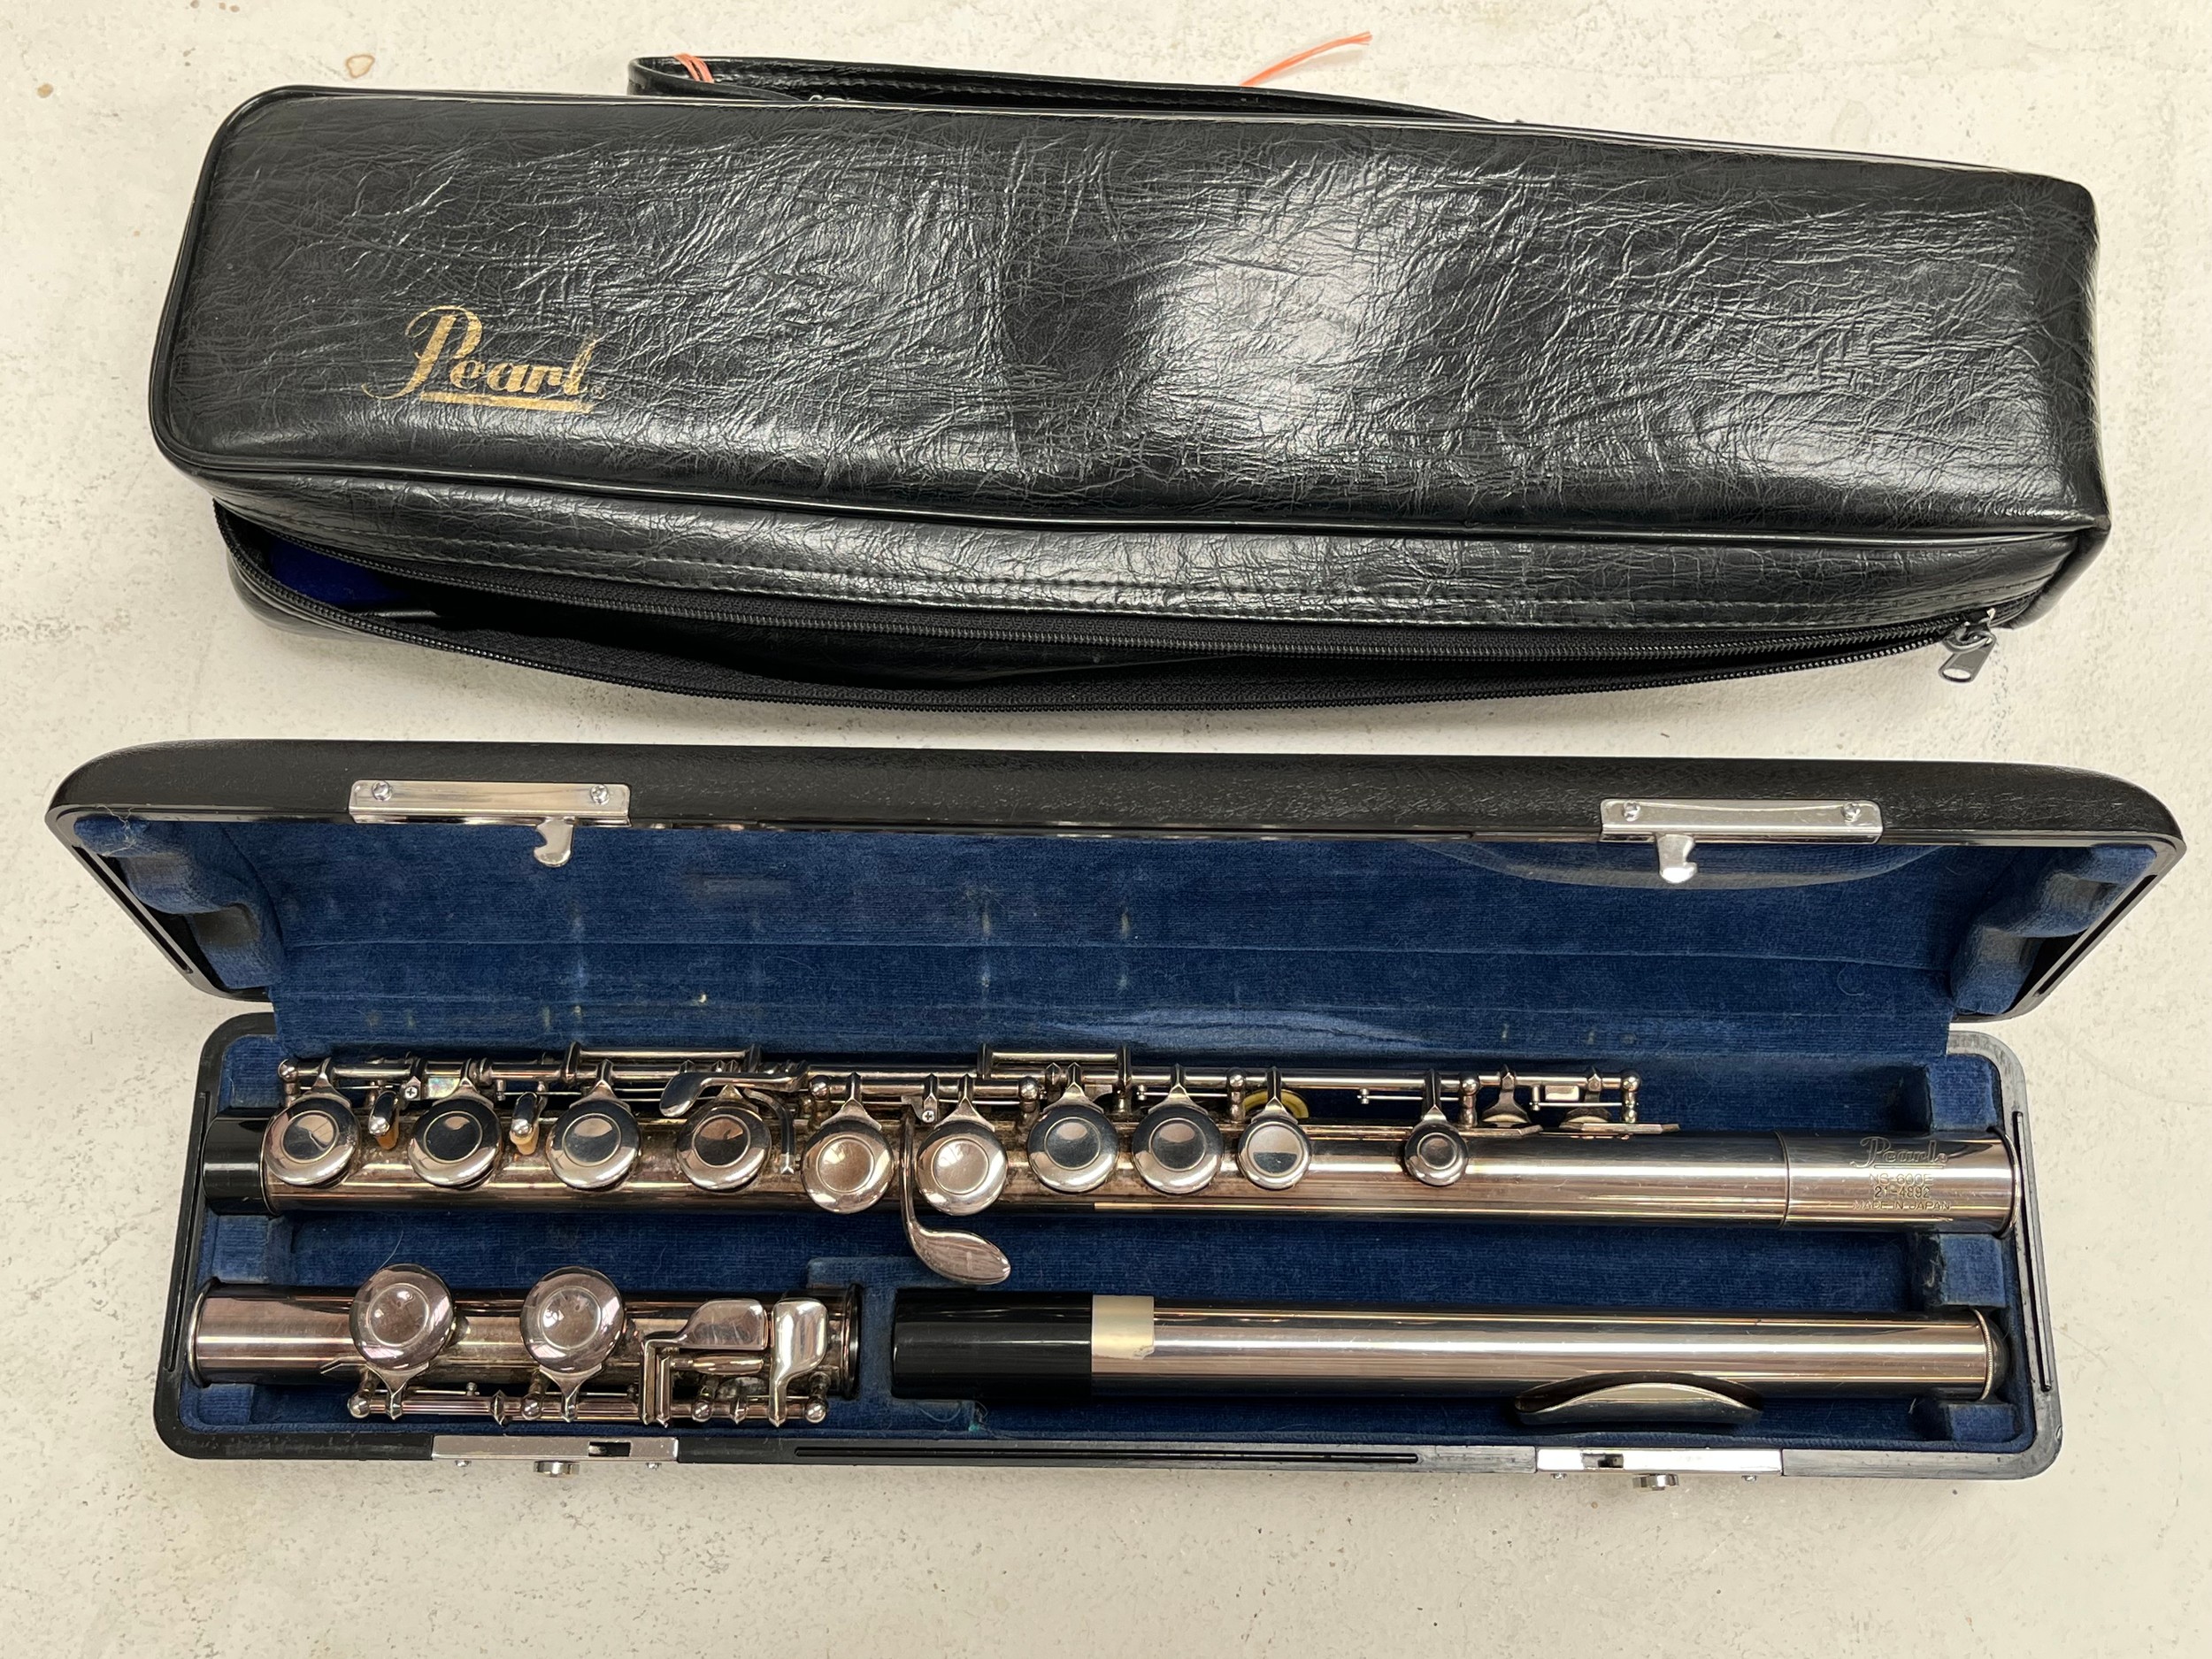 A Pearl NS-600E flute, 21-4892, made in Japan, cased and with cover